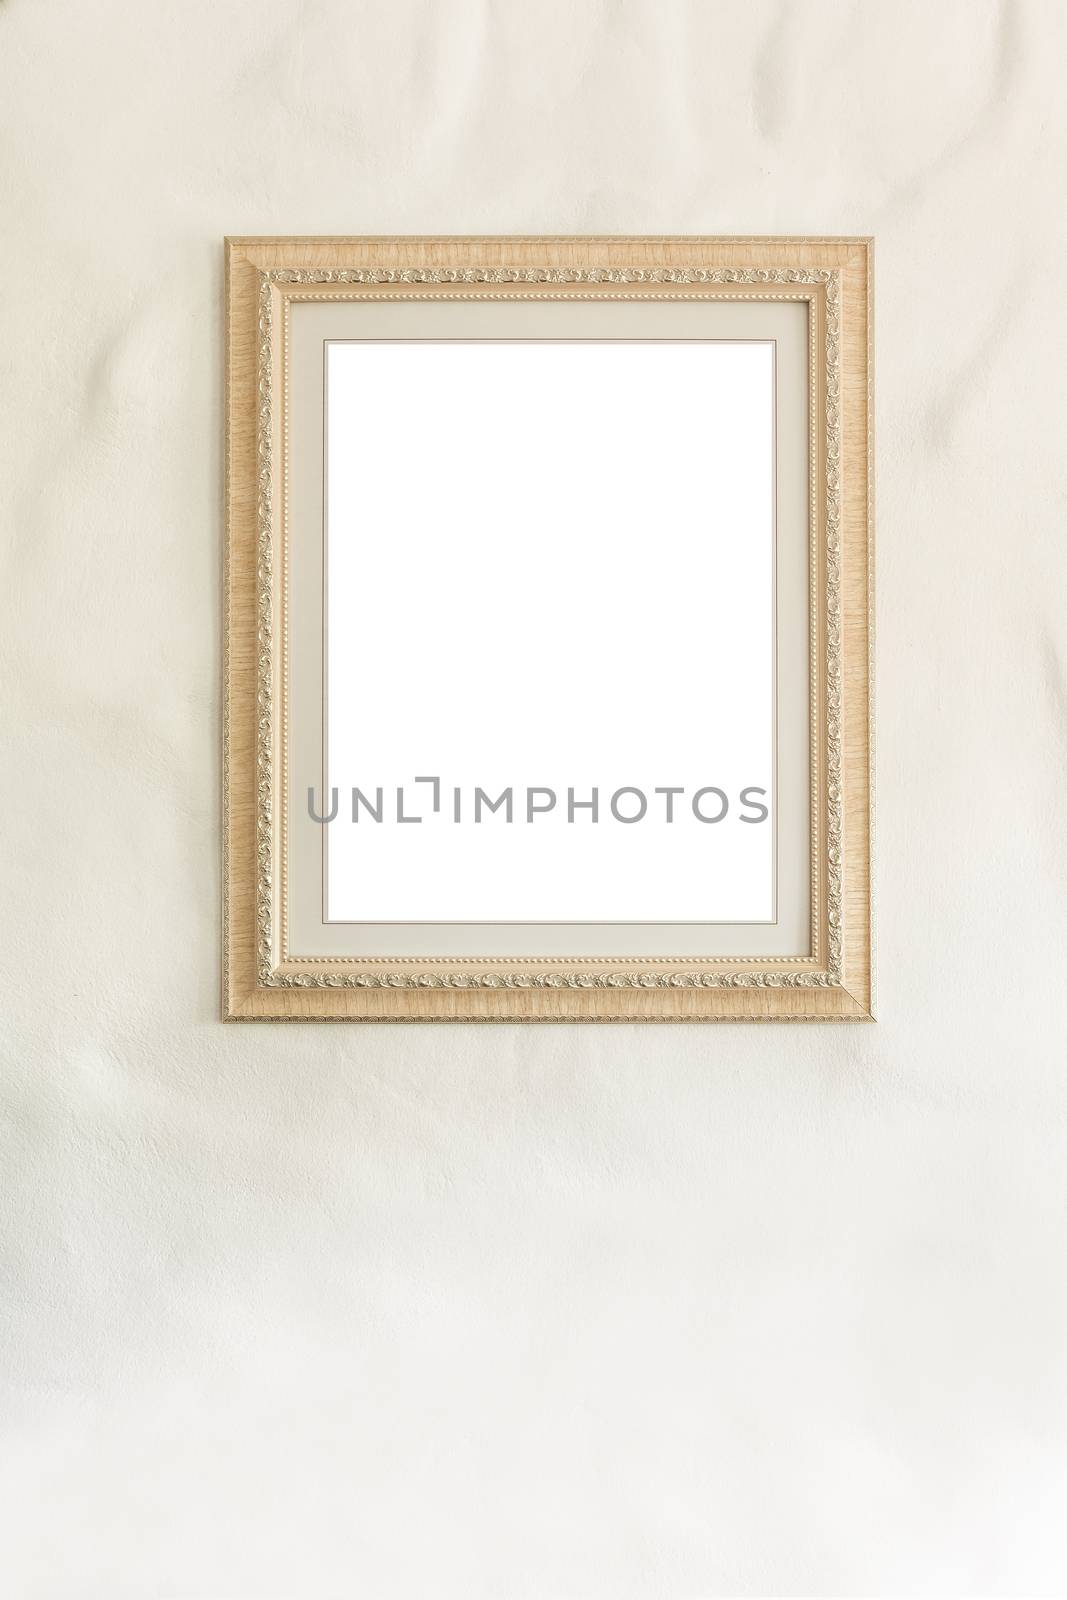 blank photo frame on white wall background